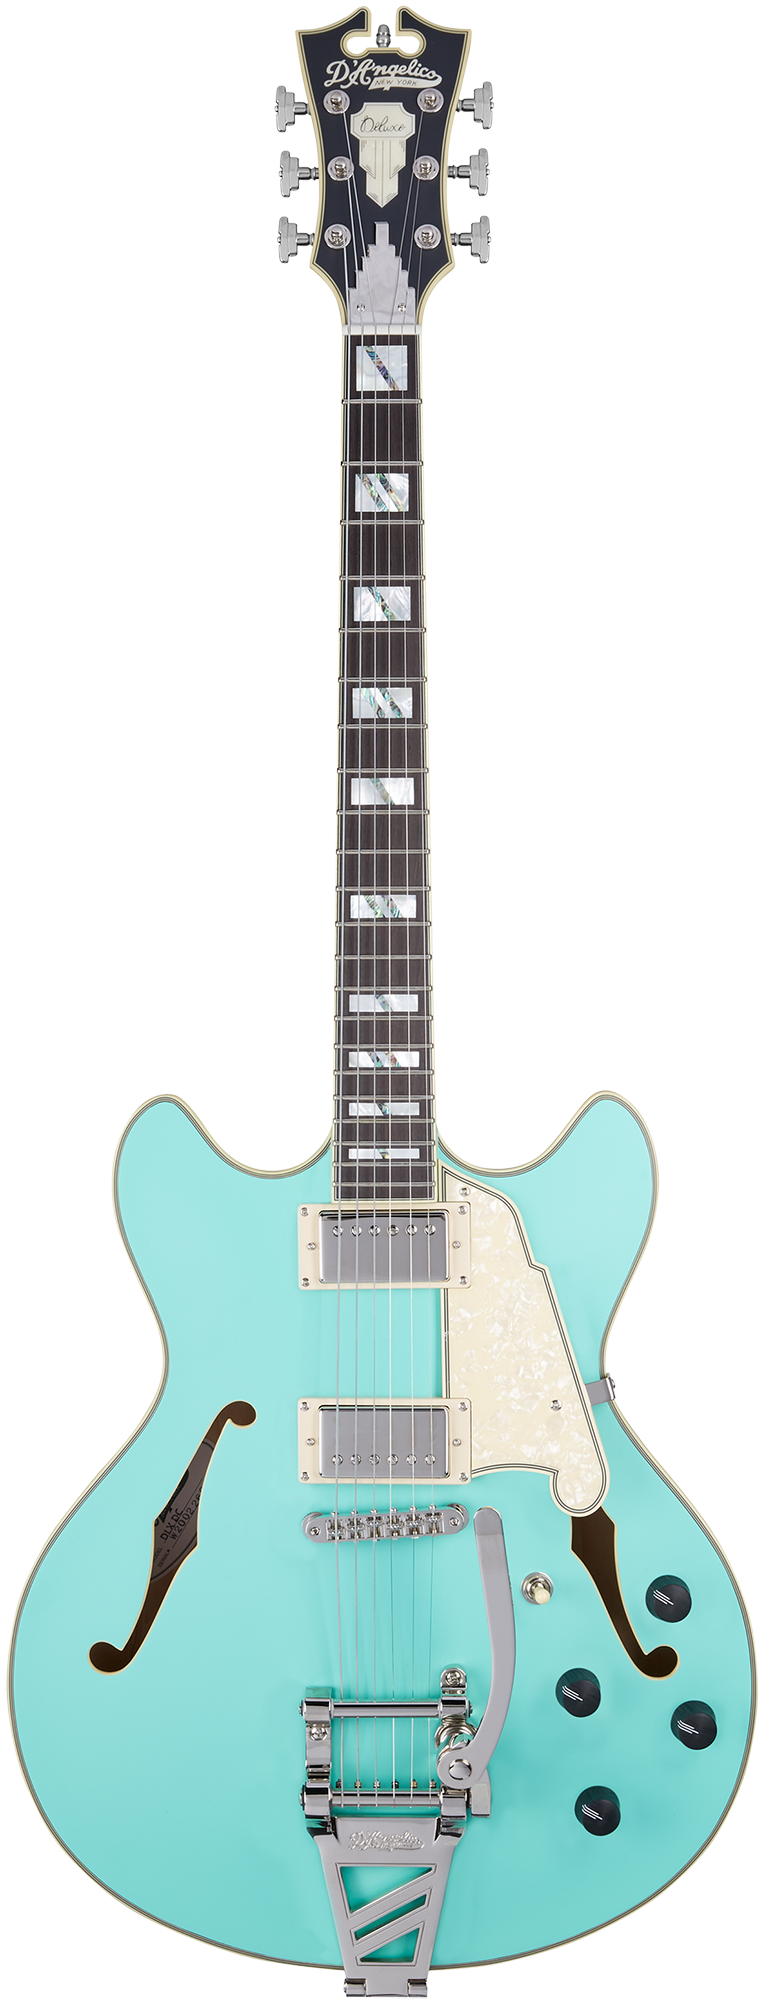 Deluxe DC LE (Discontinued) - D'Angelico Guitars